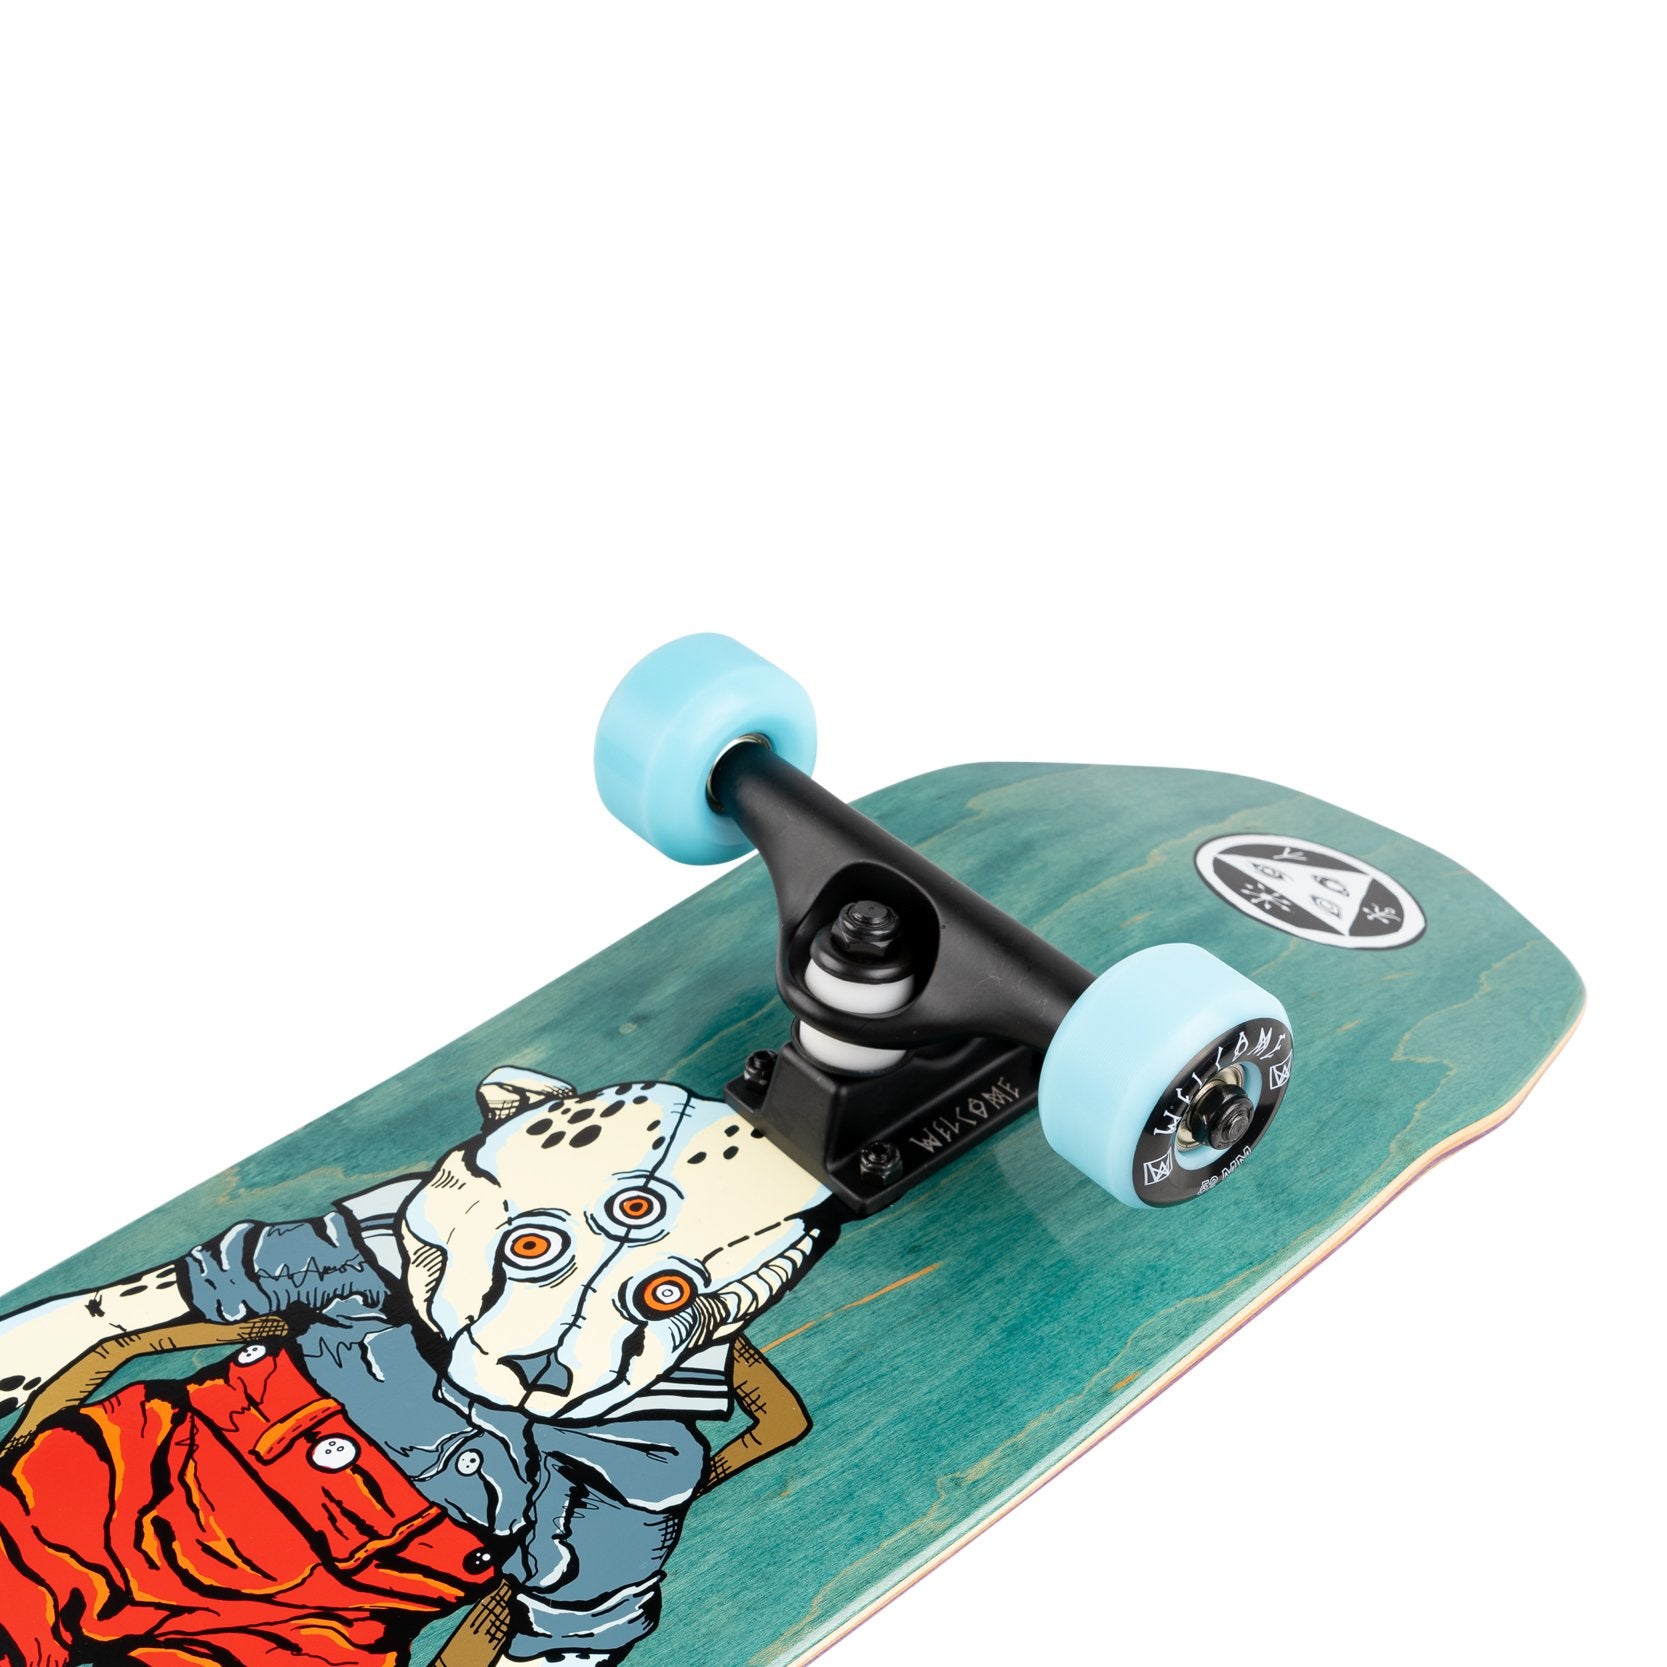 WELCOME COMPLETE - NORA "TEDDY" TEAL STAIN (7.75") - The Drive Skateshop